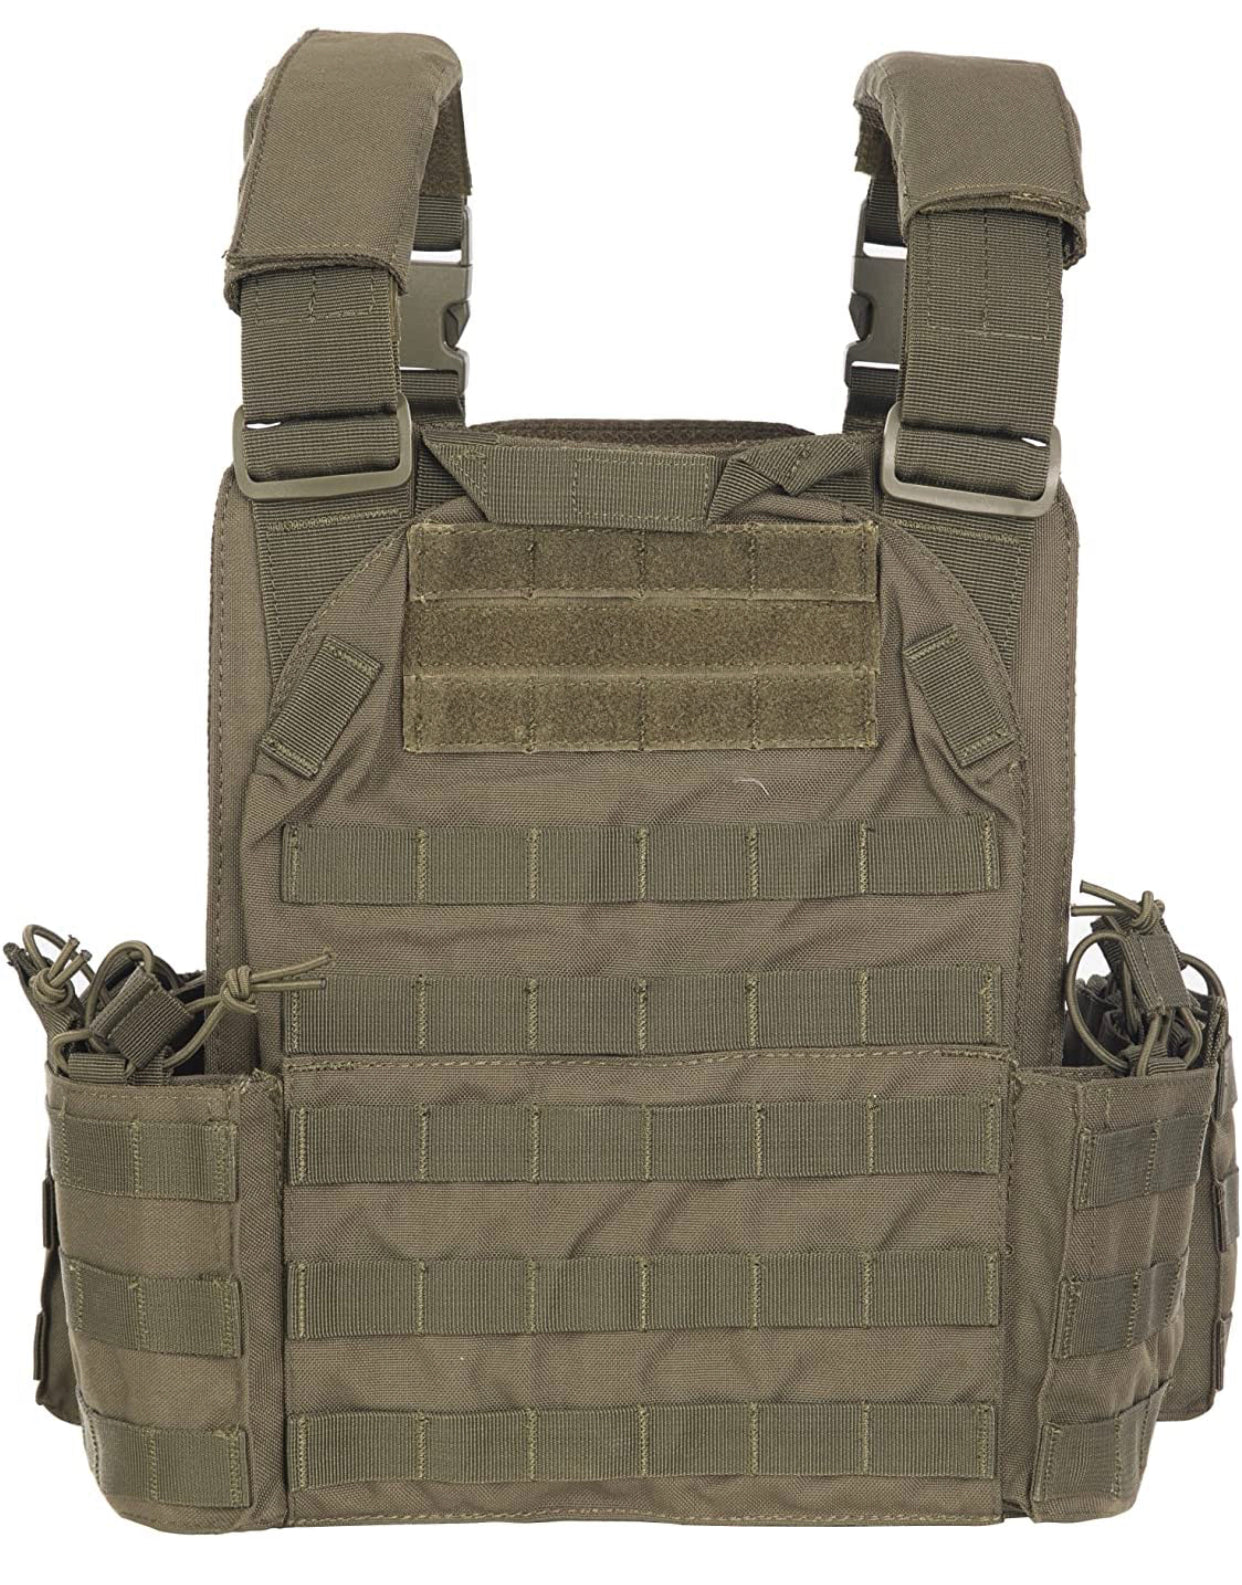 Products – Tagged tactical– Redemption Tactical